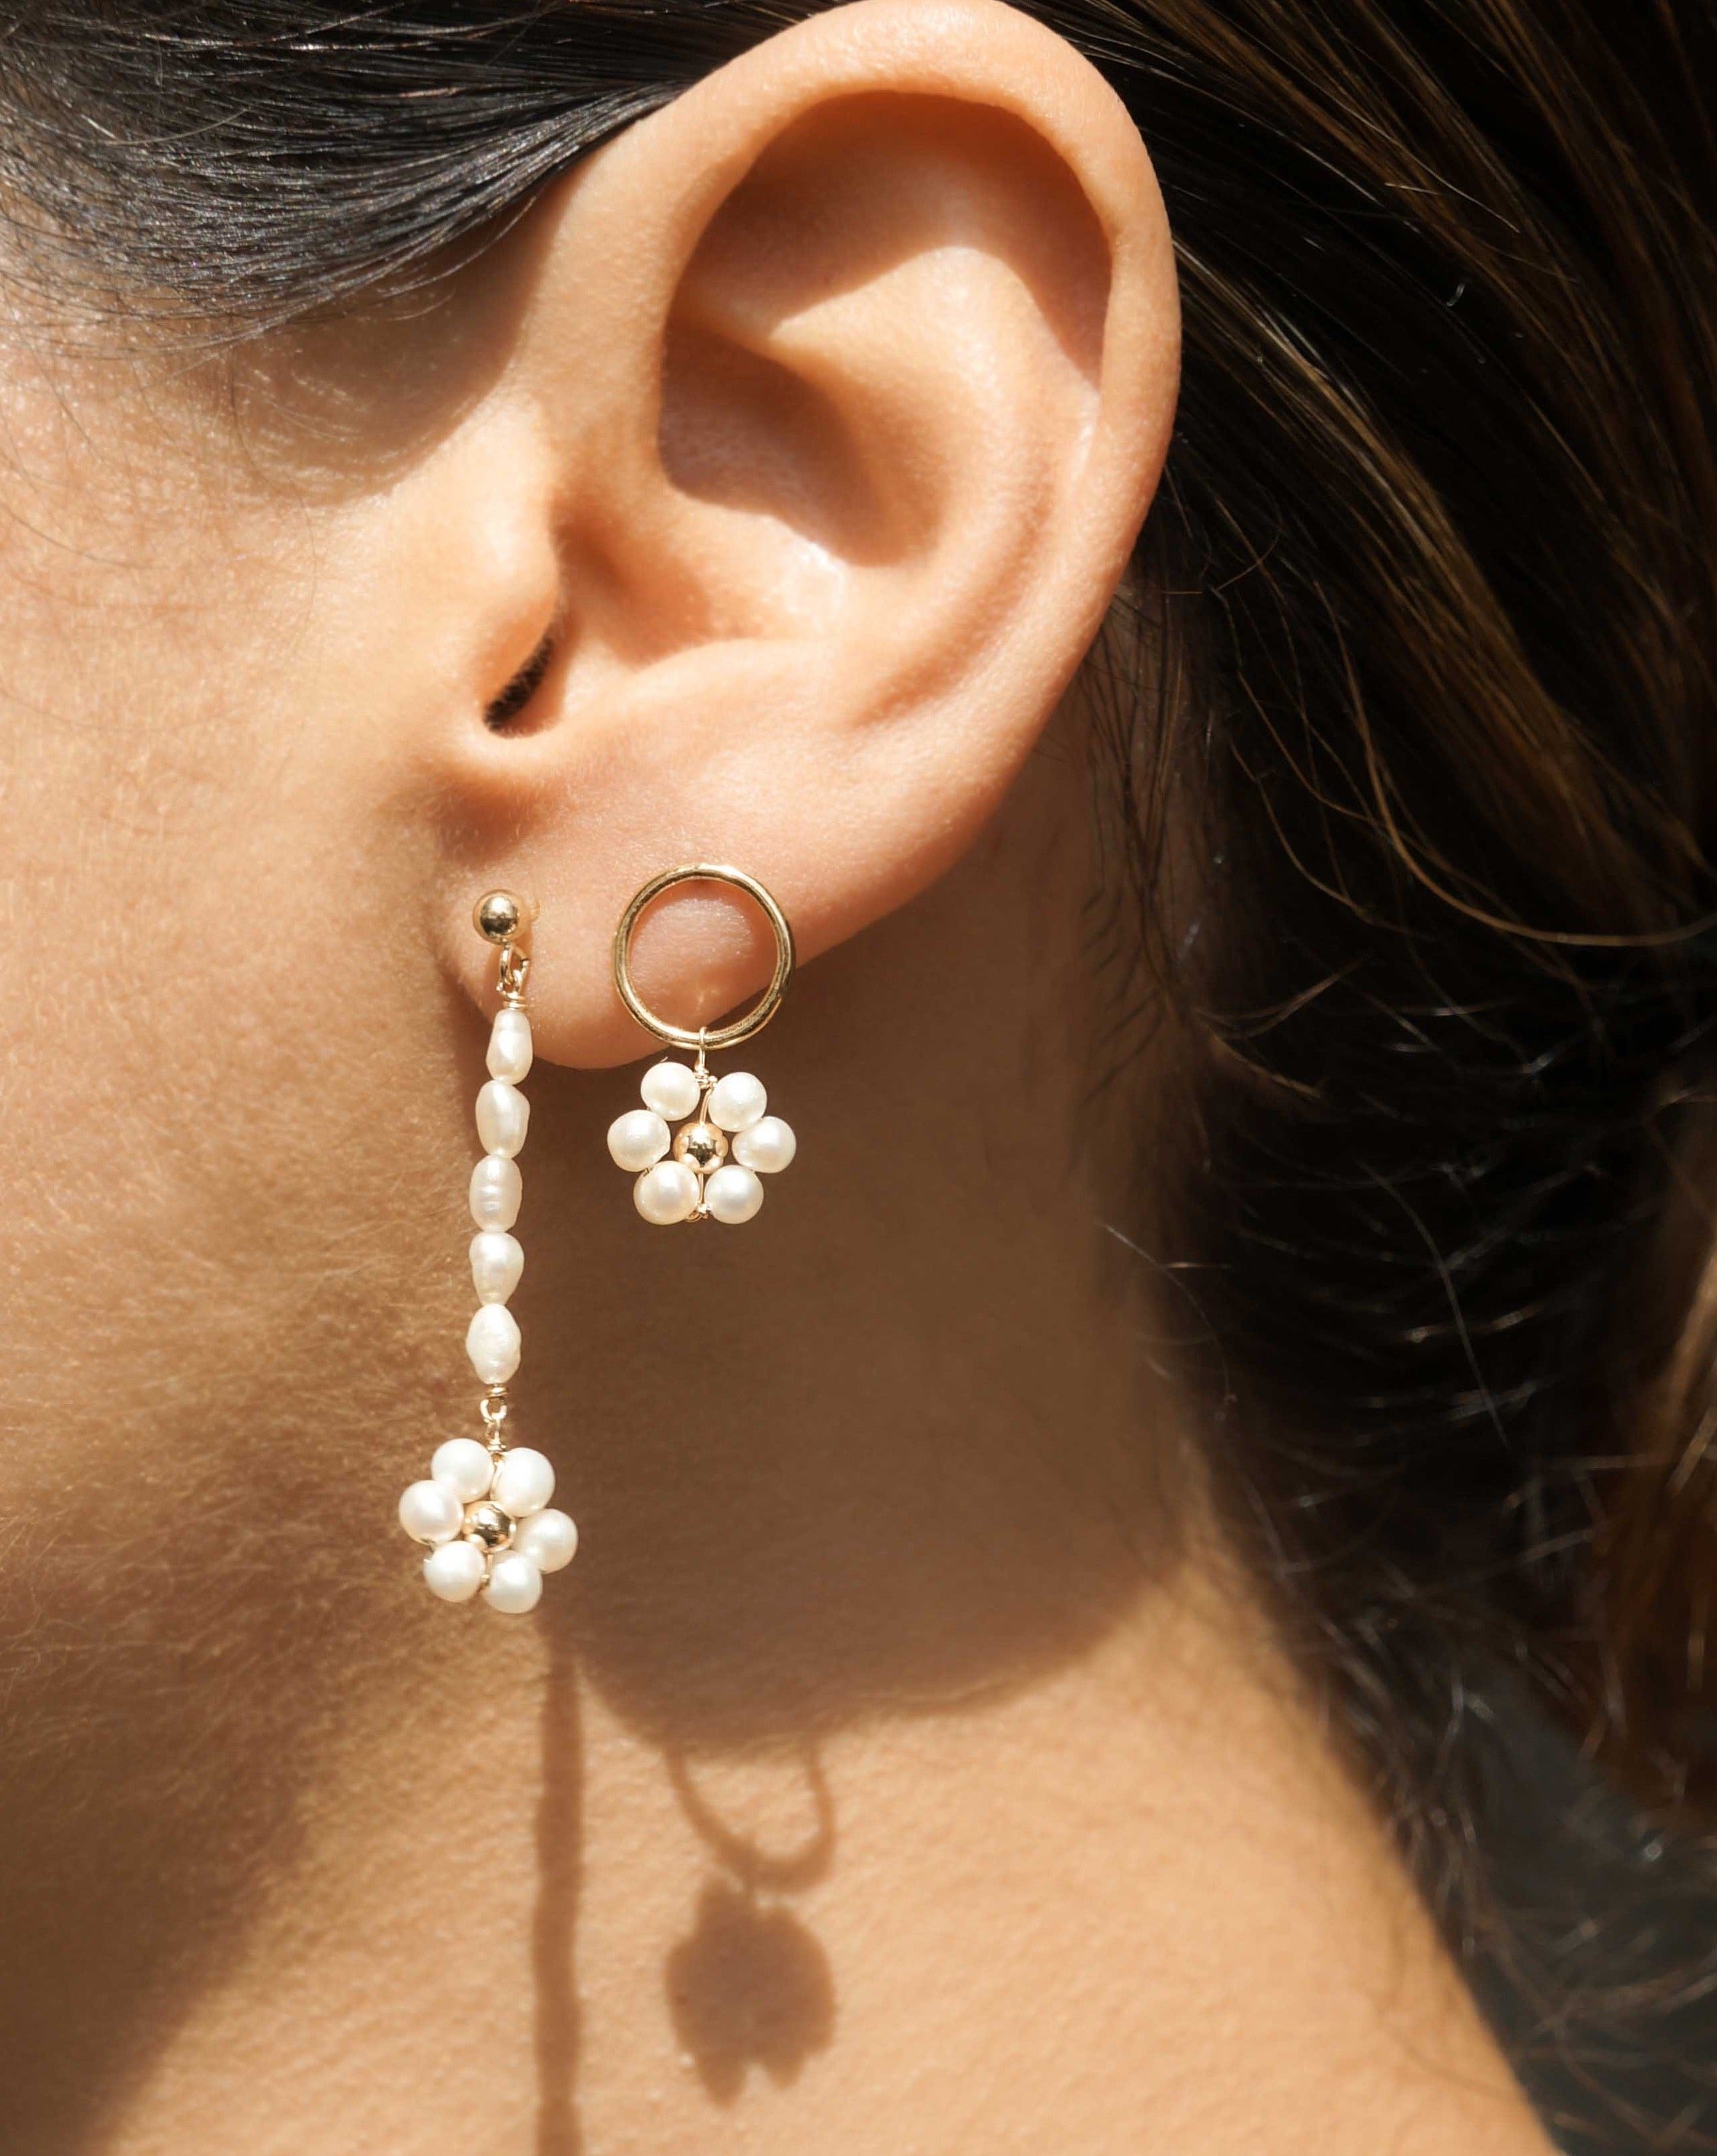 Girasol Earrings by KOZAKH. 10mm circle studs, crafted in 14K Gold Filled, featuring 3-4mm round freshwater Pearls forming a daisy.